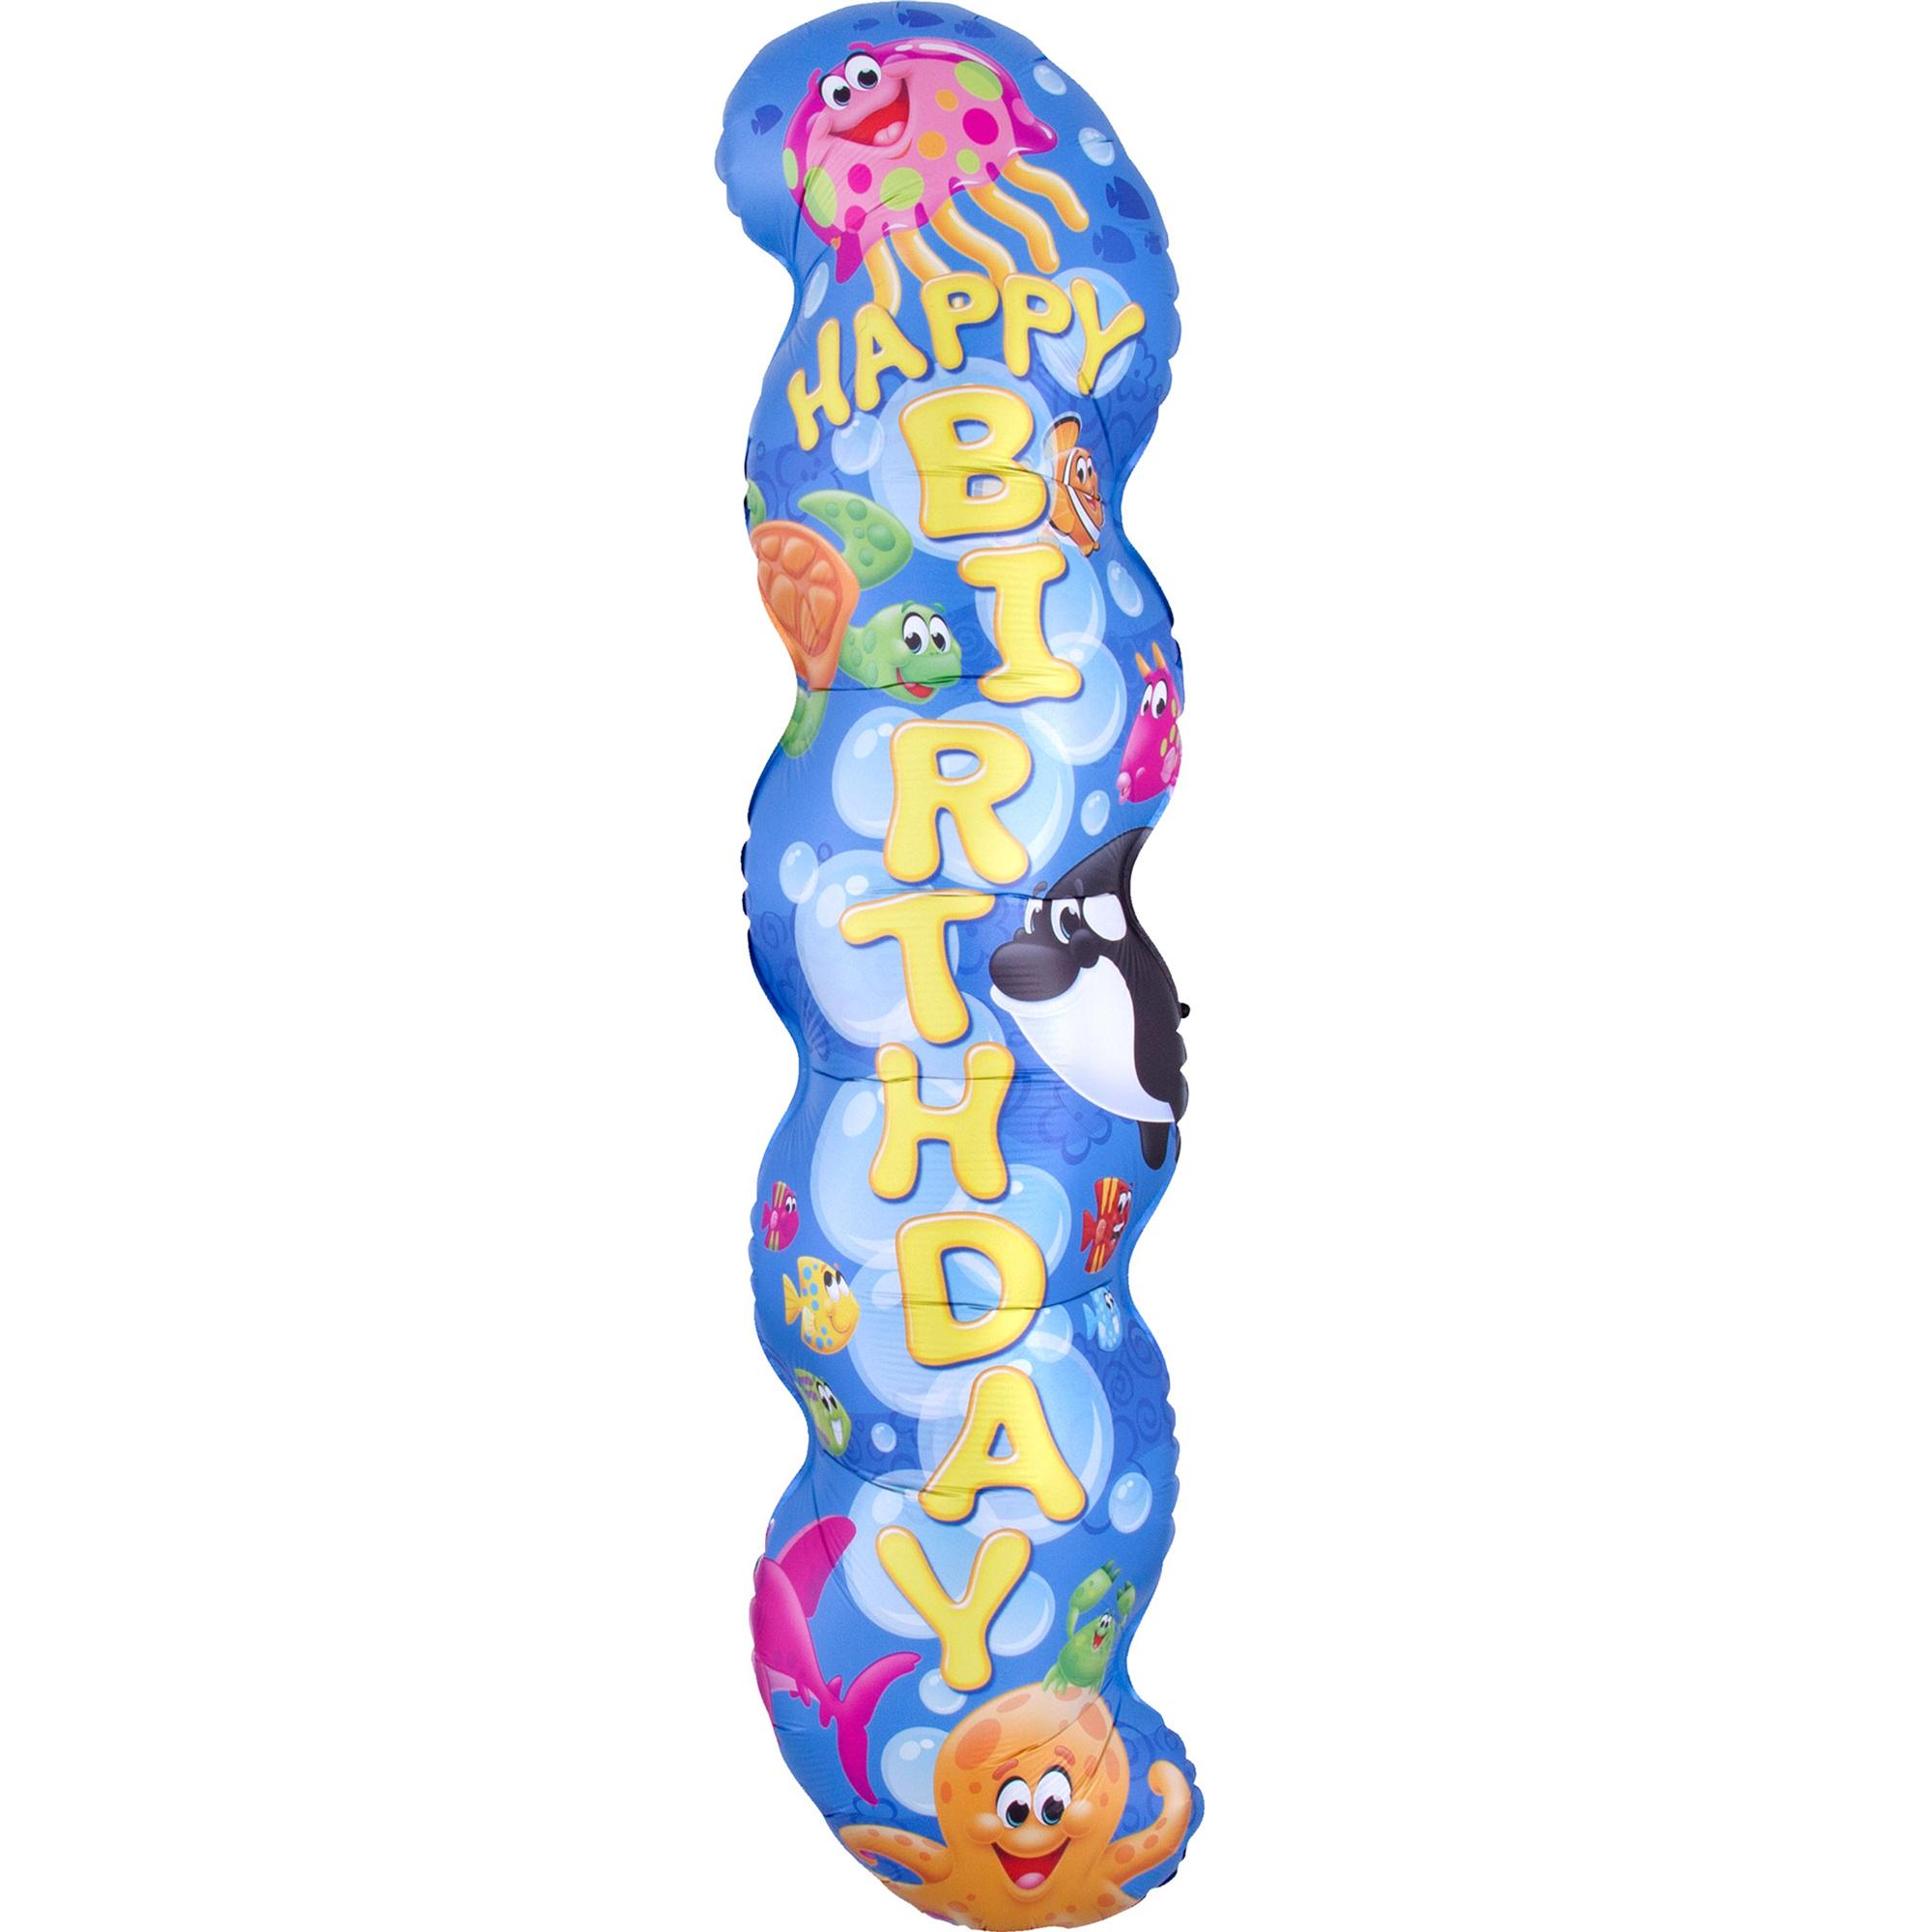 Sea Buddies Trend Birthday SuperShape Balloon 25x101cm Balloons & Streamers - Party Centre - Party Centre